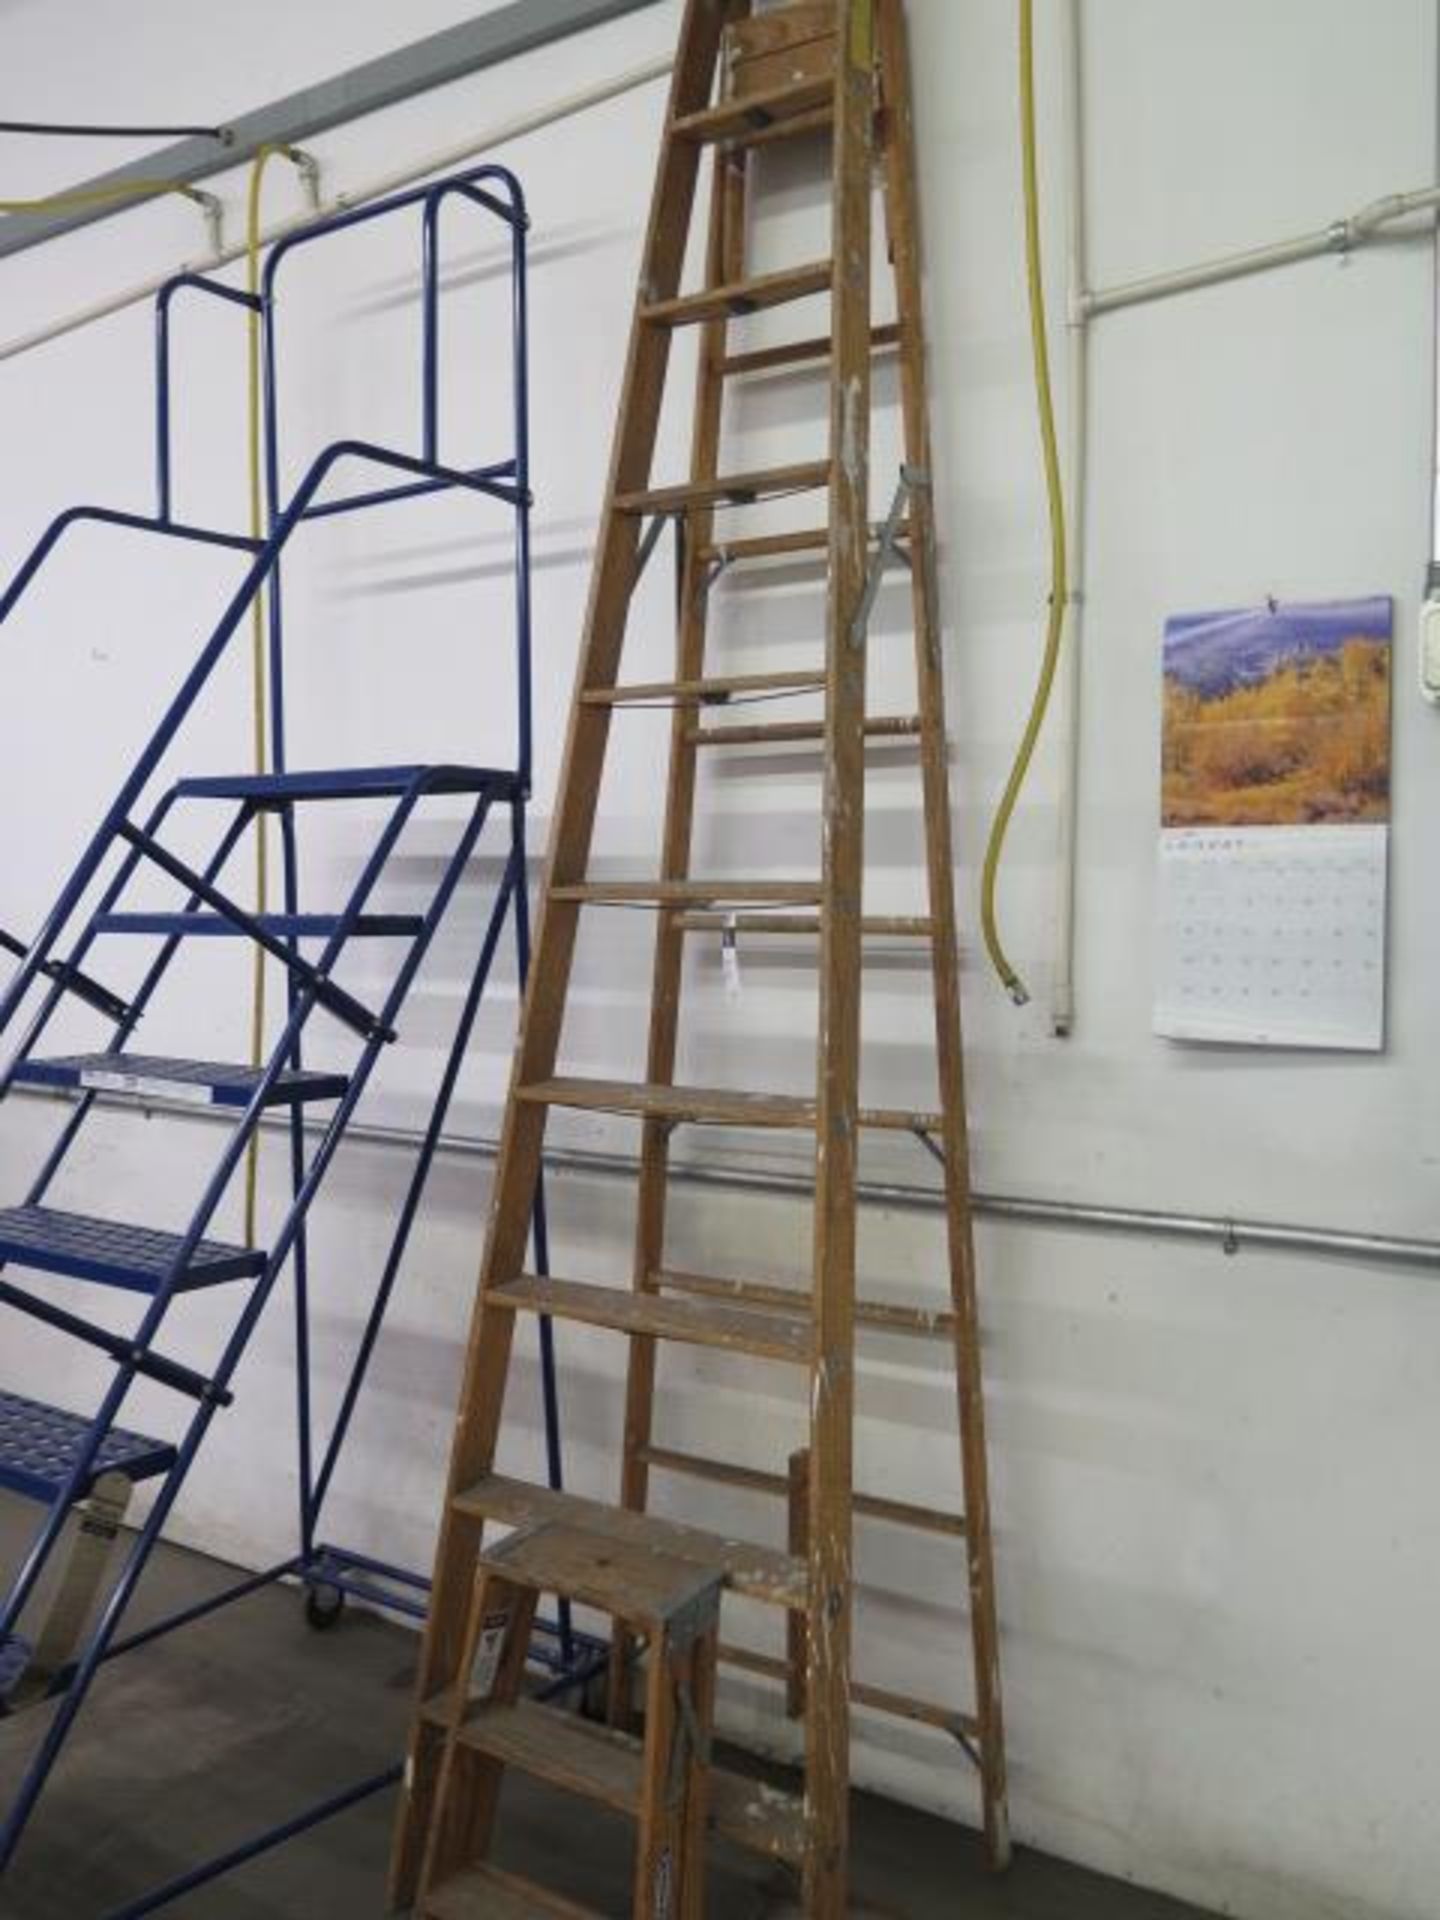 Wooden Ladders - Image 2 of 2